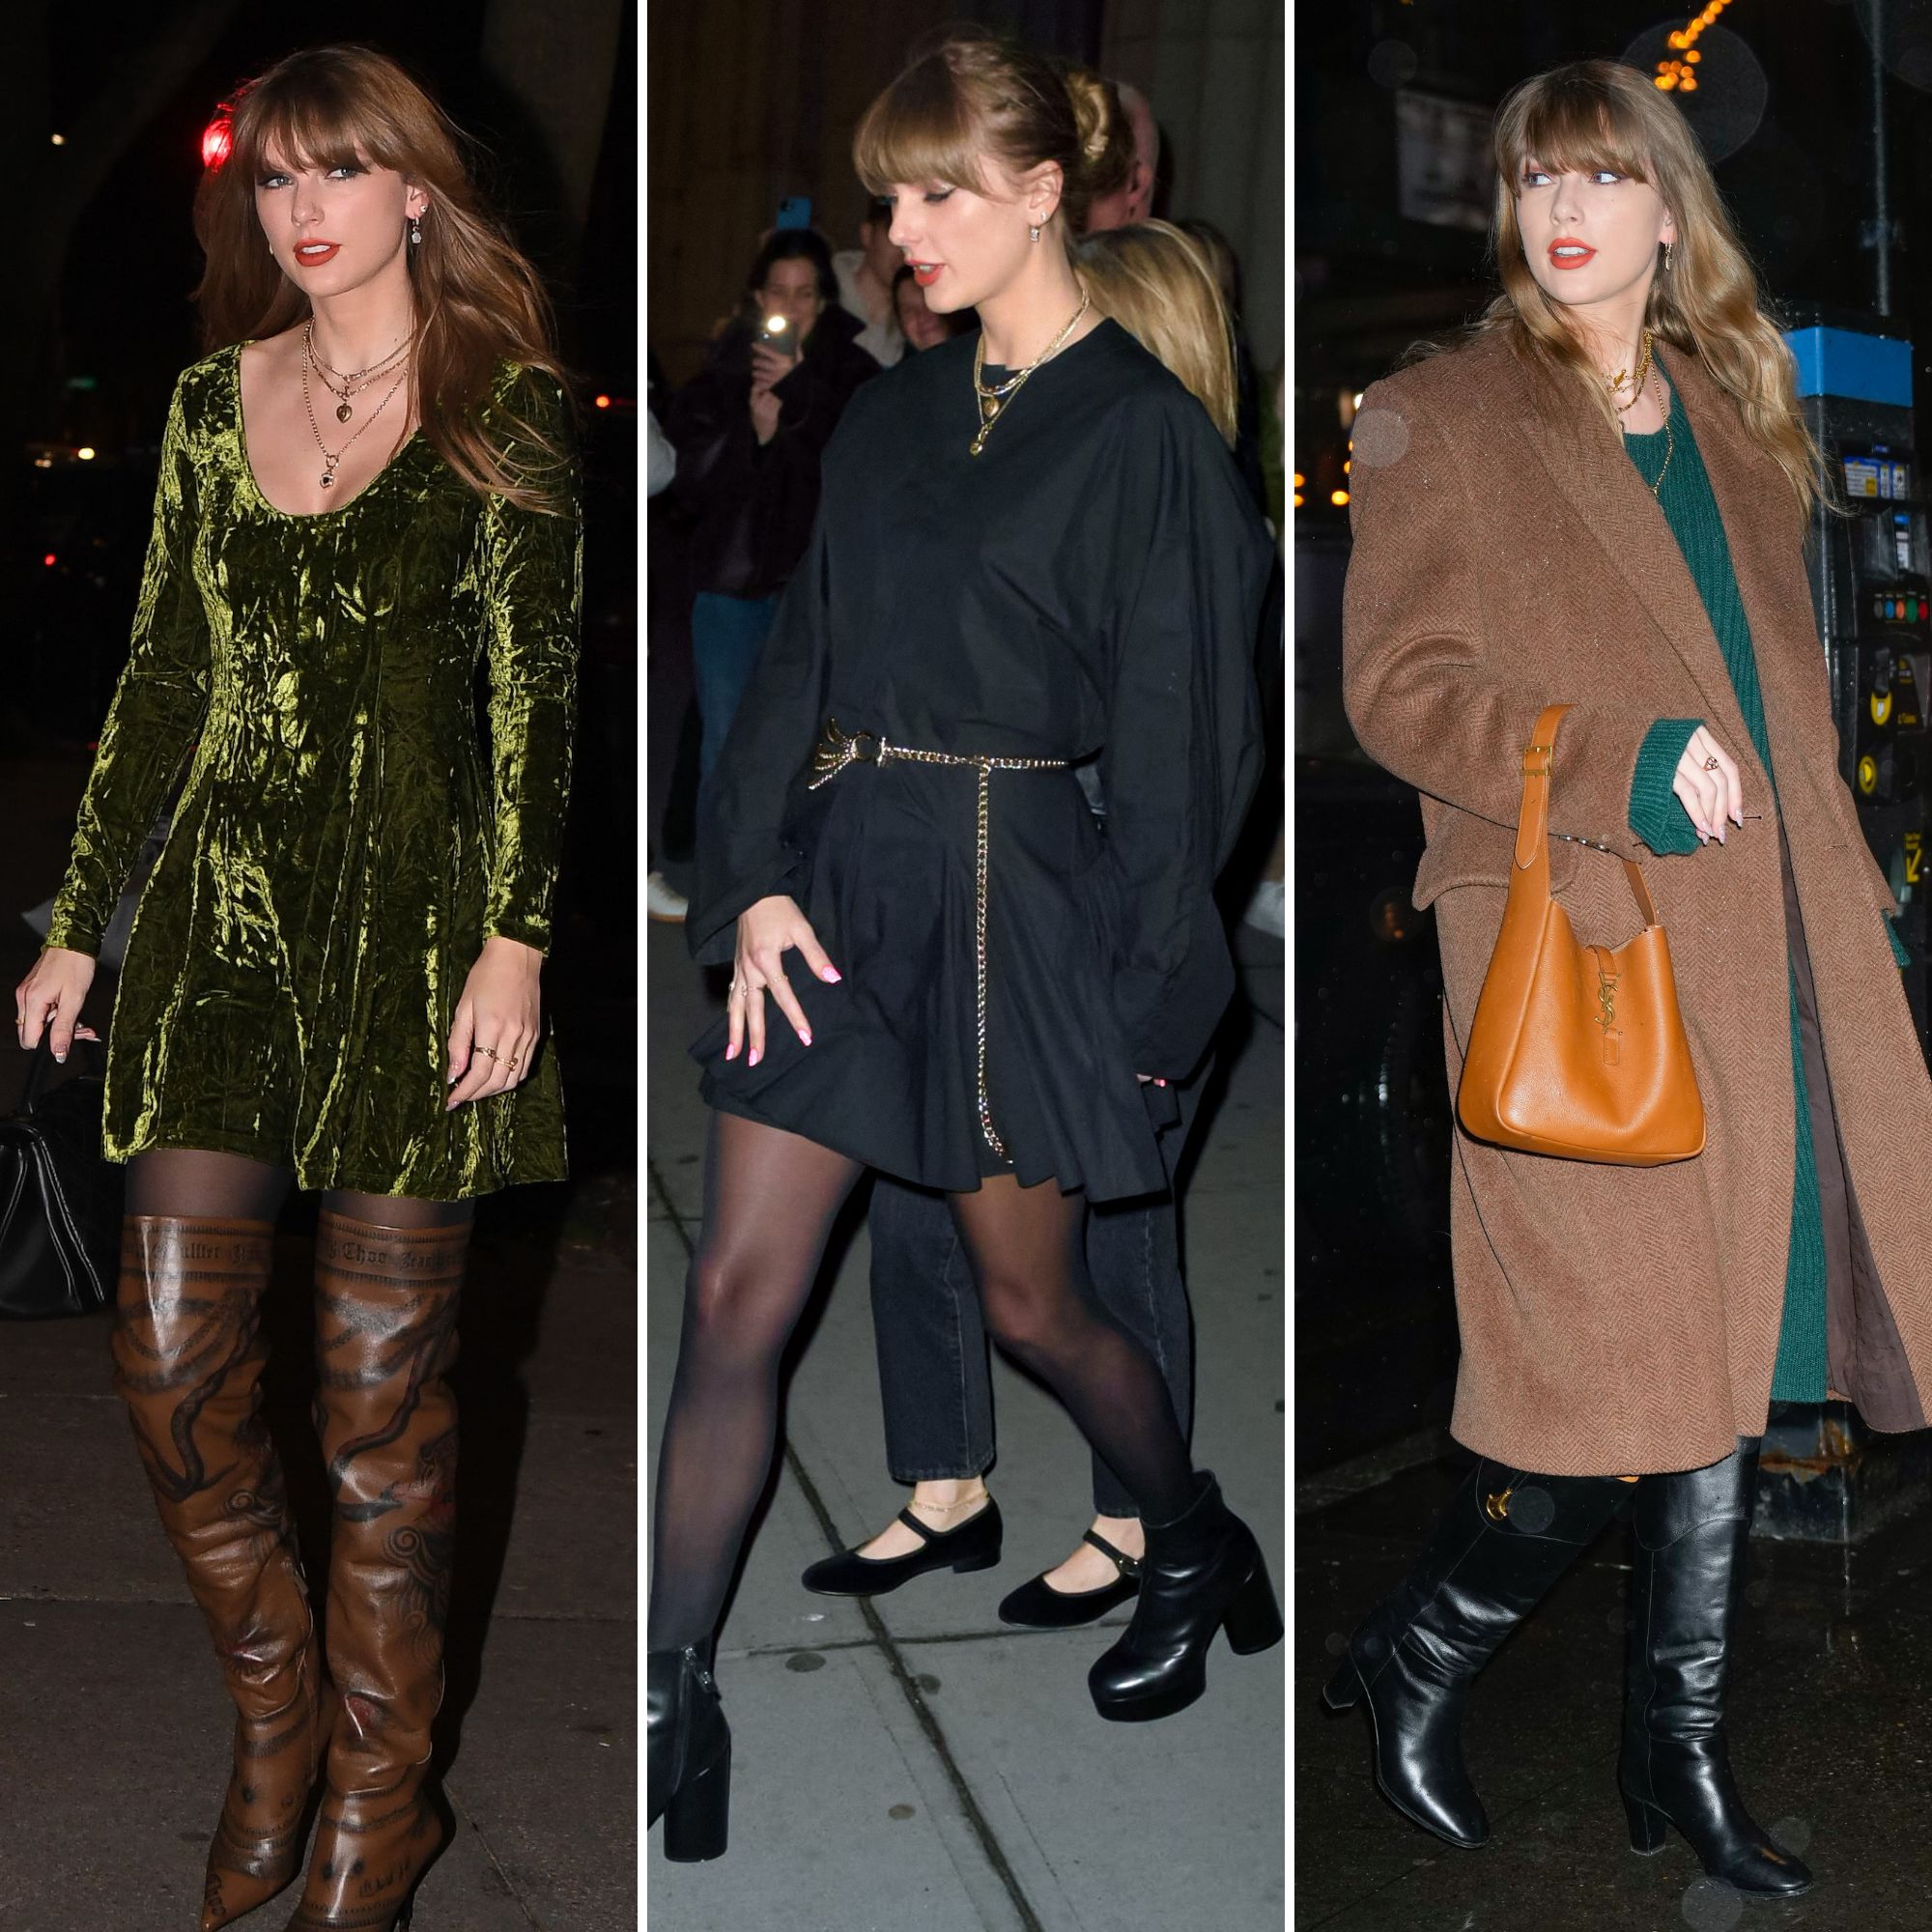 Blake Lively and Taylor Swift wear perfect girls night out 'fits